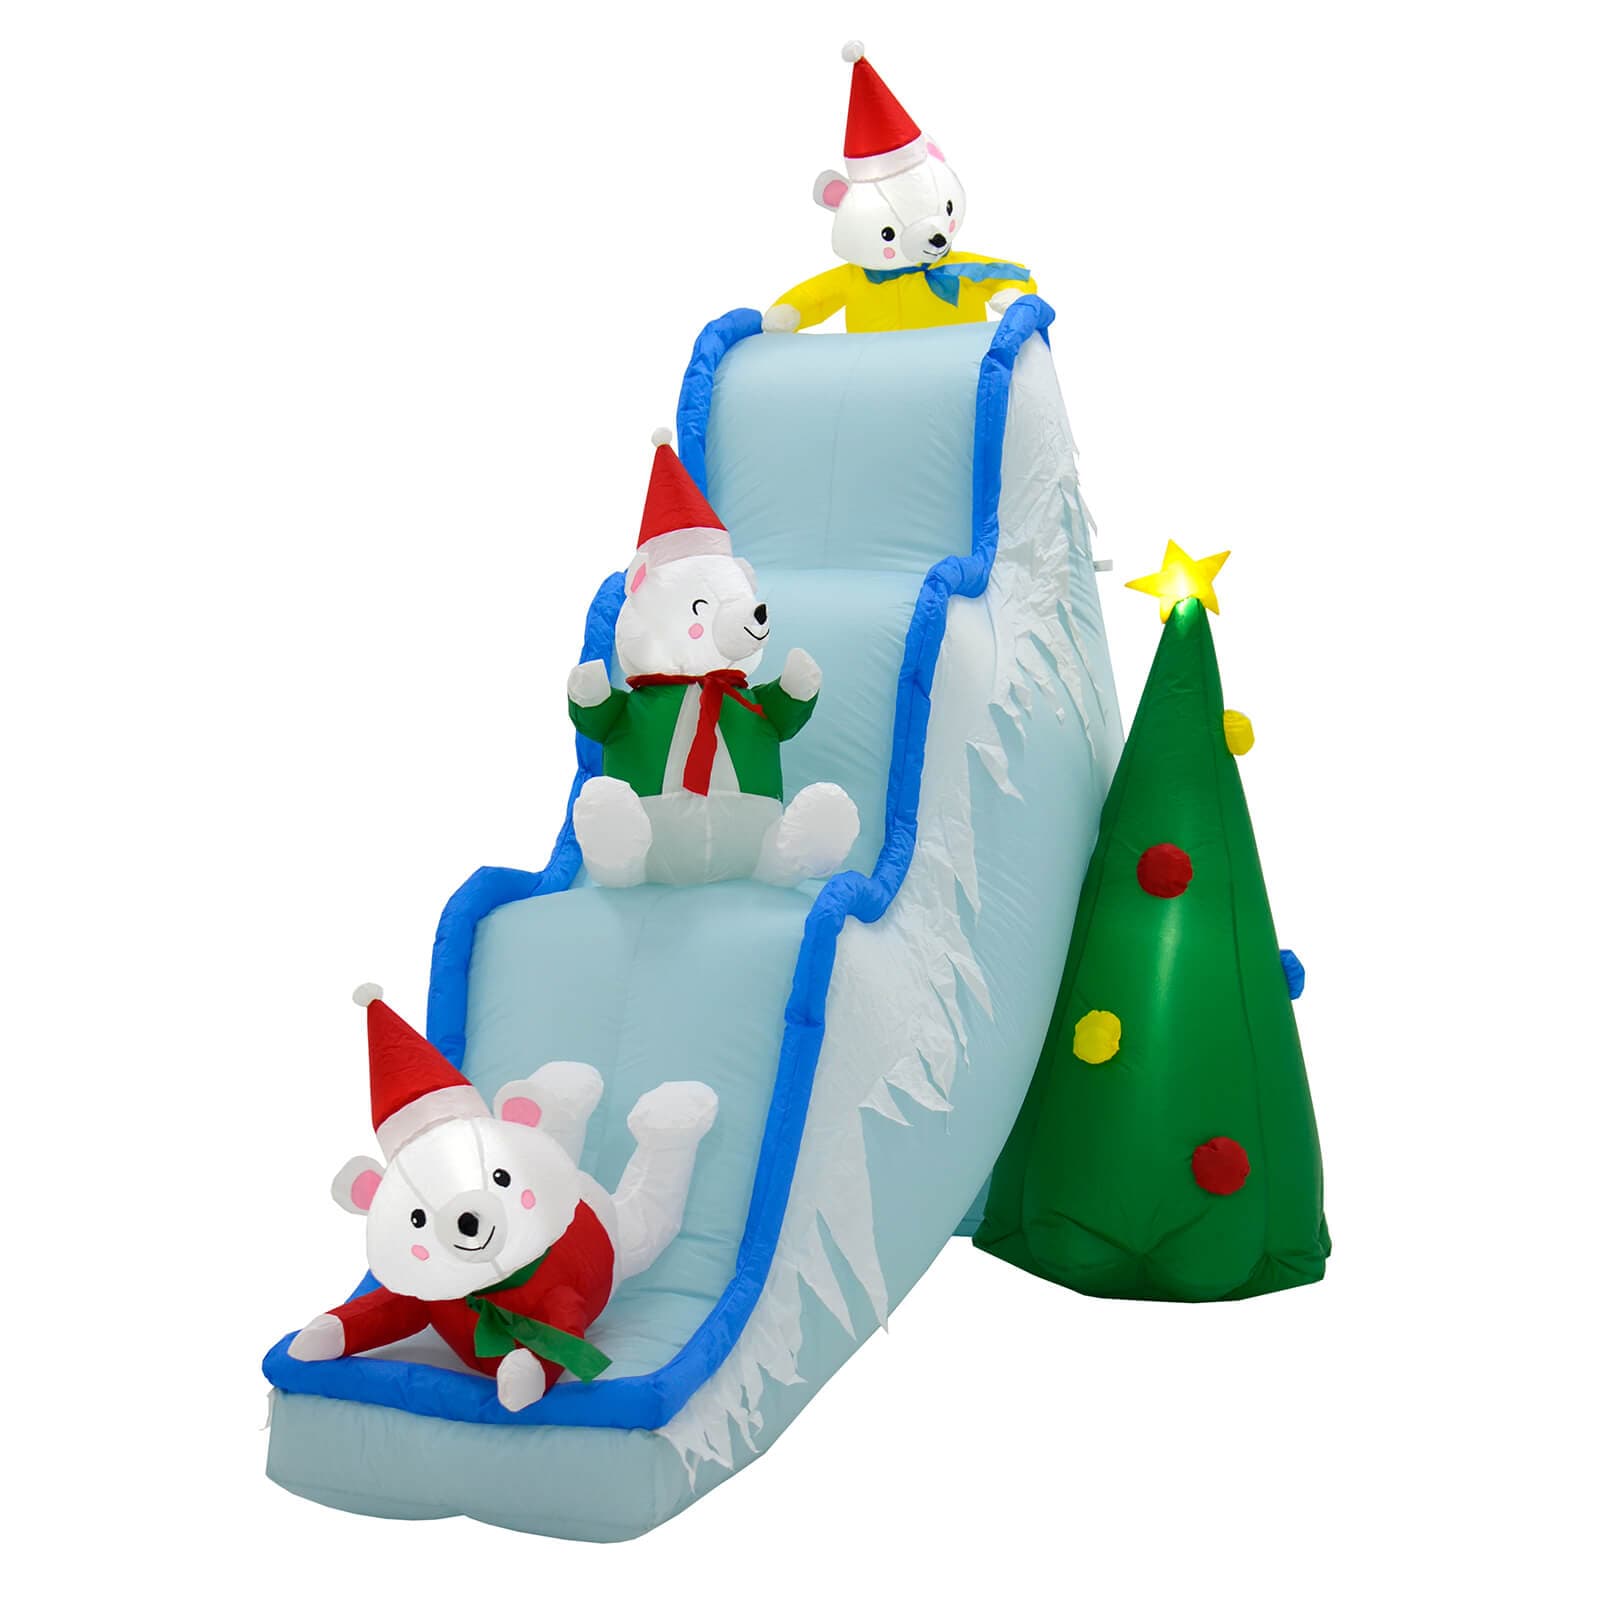 Large Christmas inflatable garden decoration with 3 polar bears wearing red hats on a slide with Christmas tree